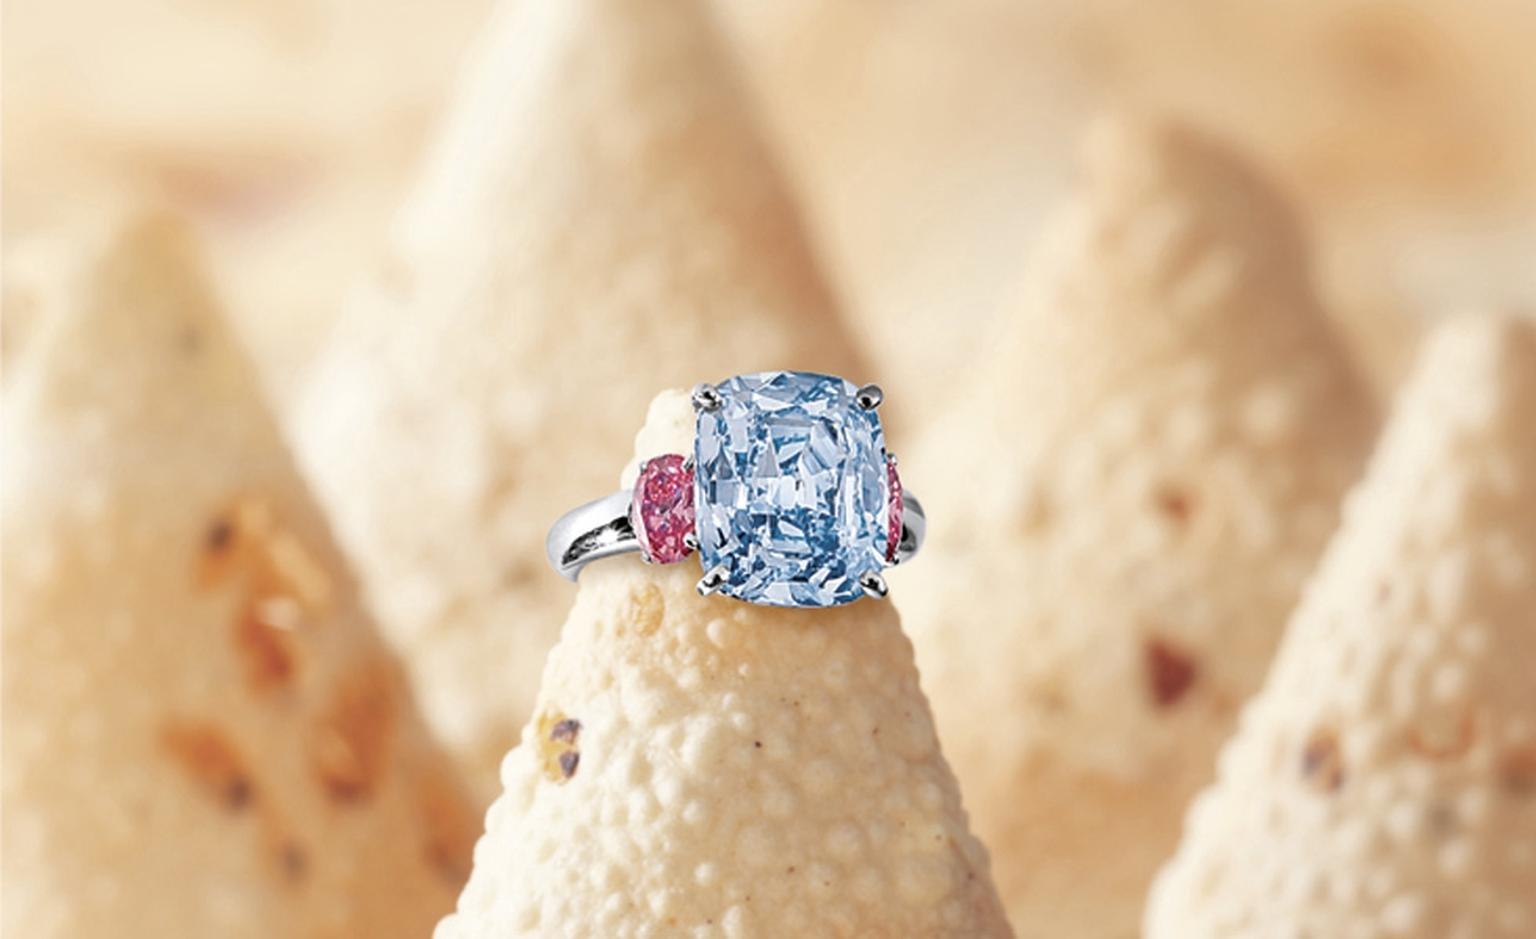 LOT 2851. Rare and important fancy vivid blue diamond and pink diamond ring. EST 70,000,000 - 85,000,000 HKD OLD 79,060,000 HKD